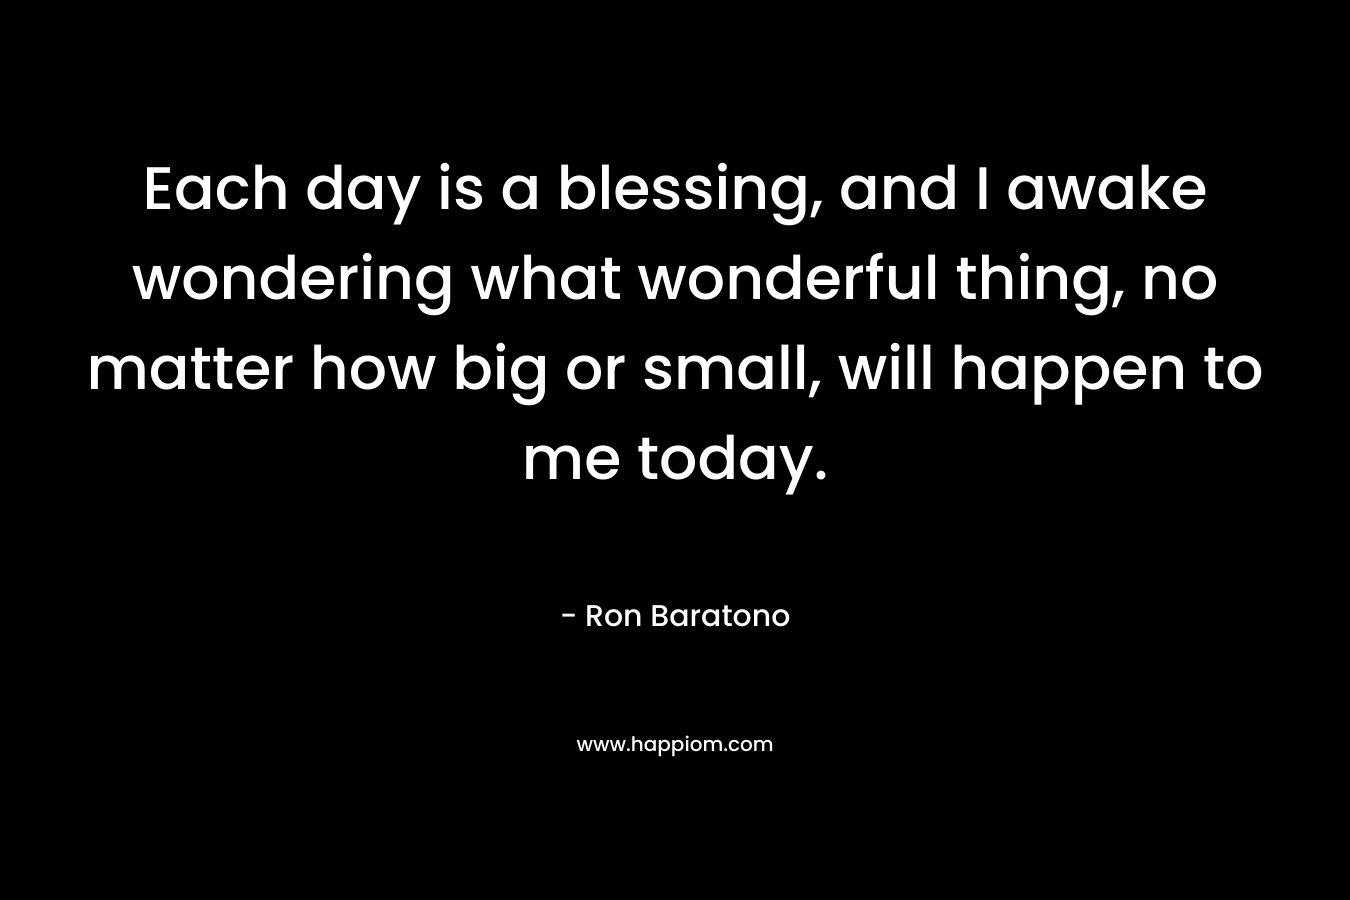 Each day is a blessing, and I awake wondering what wonderful thing, no matter how big or small, will happen to me today.